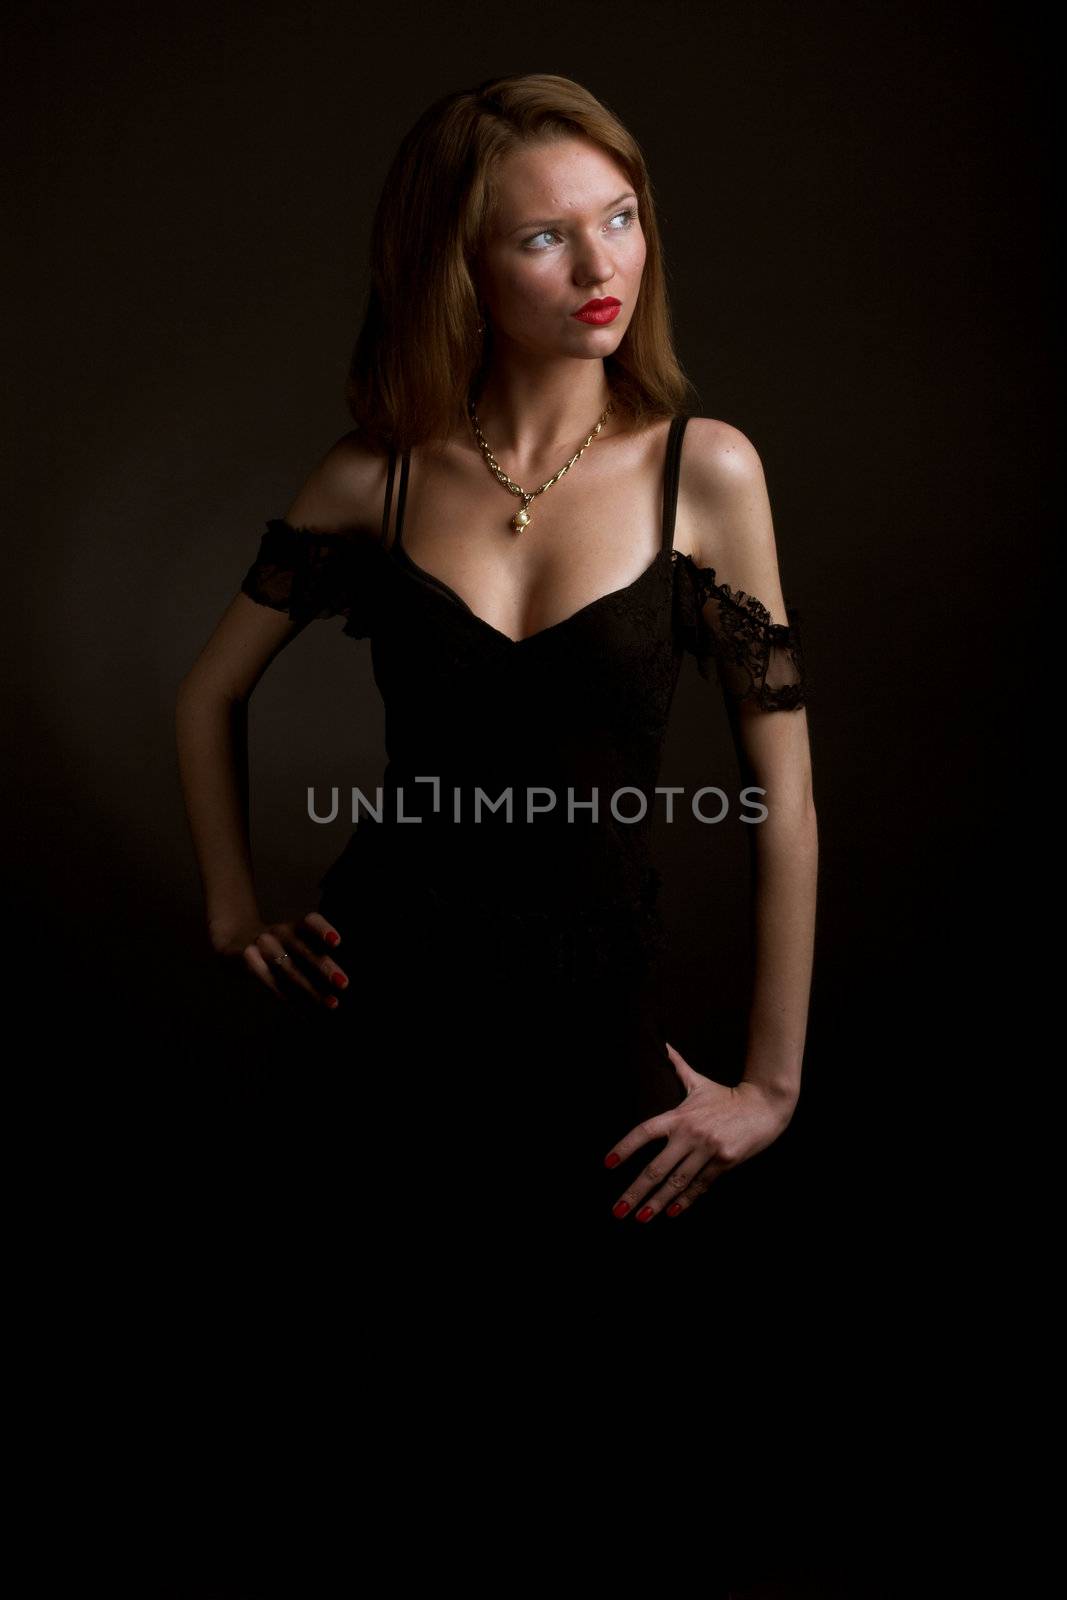 Young glamor woman in black dress